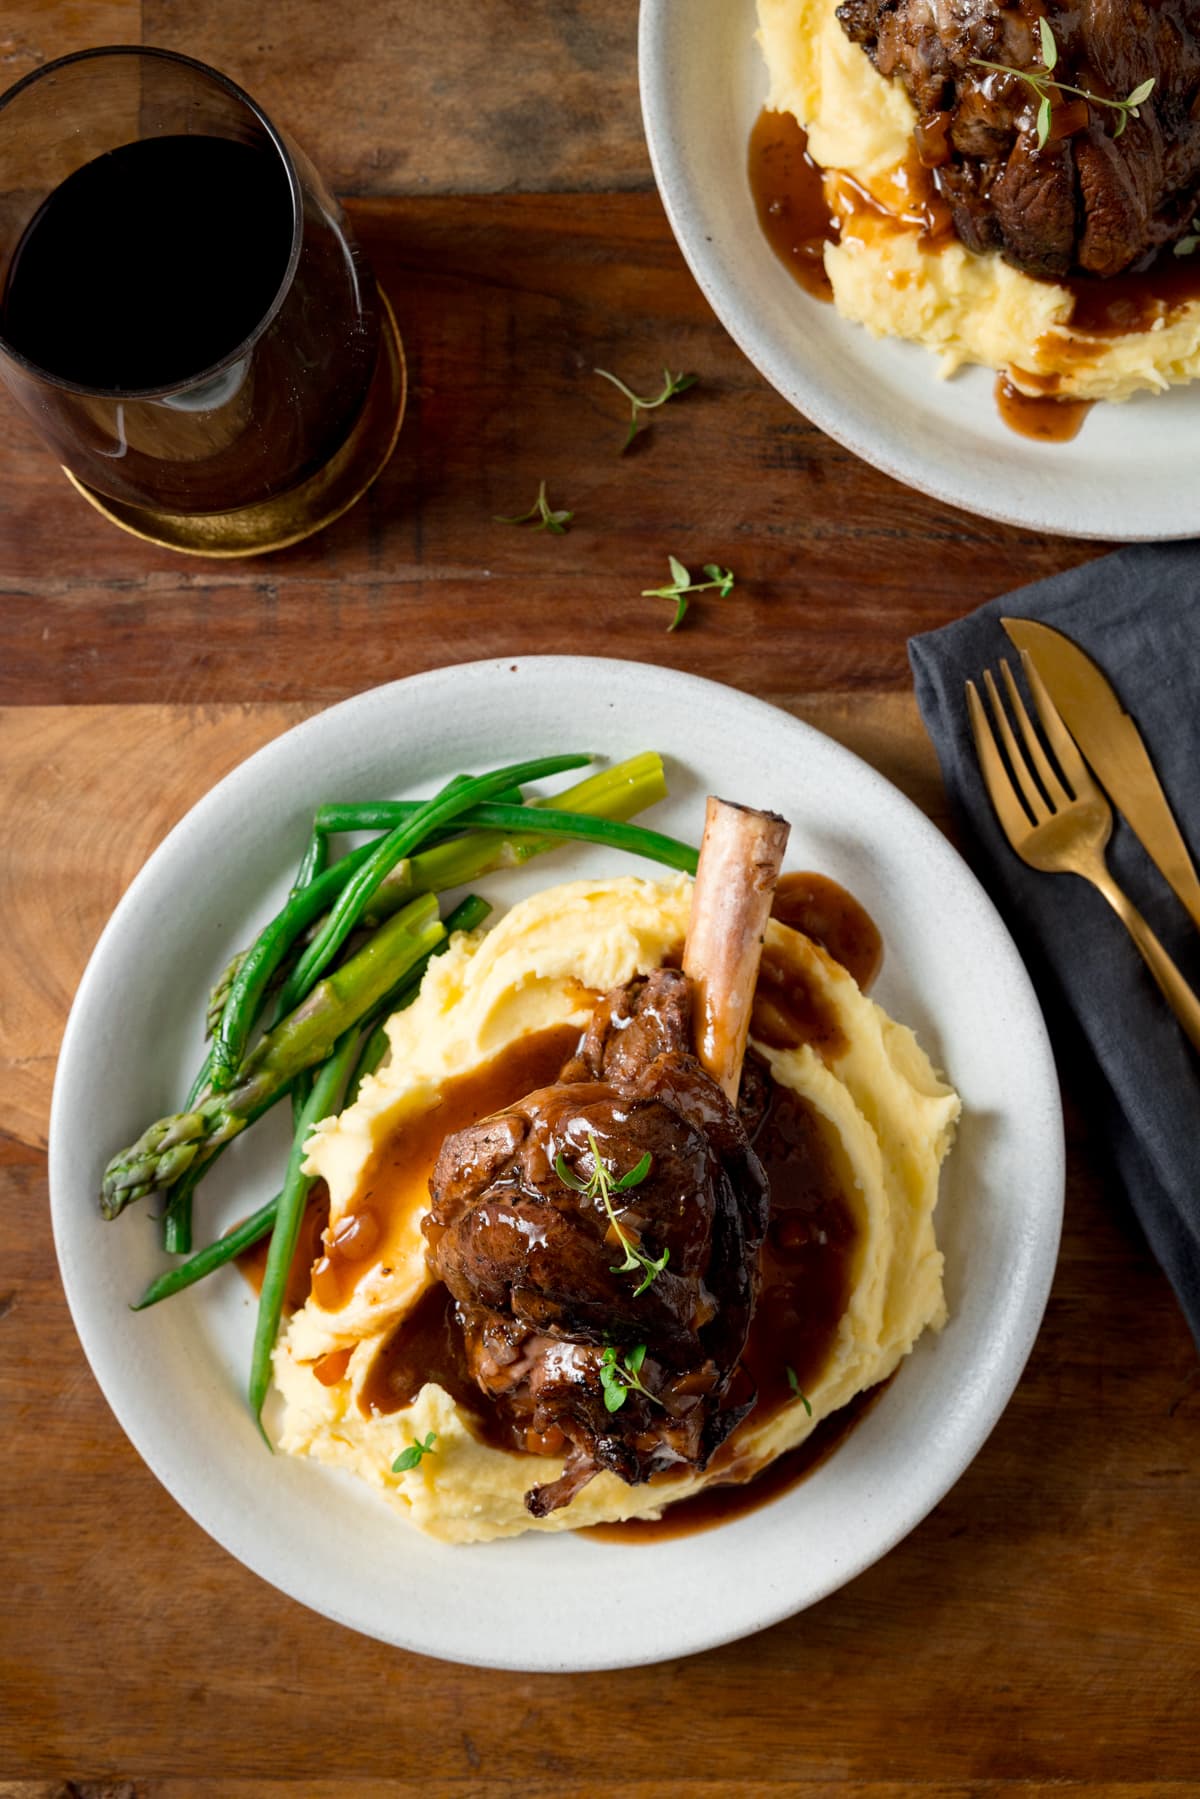 Slow cooked lamb shank on a pile of mashed potato with green beans and asparagus on a white plate. There is gravy and sprigs of fresh thyme on the lamb shank. The plate is on a wooden table. There is a further plate with lamb shank and mashed potato at the top of the frame, along with a glass of red wine and a gold knife and fork on a grey napkin.